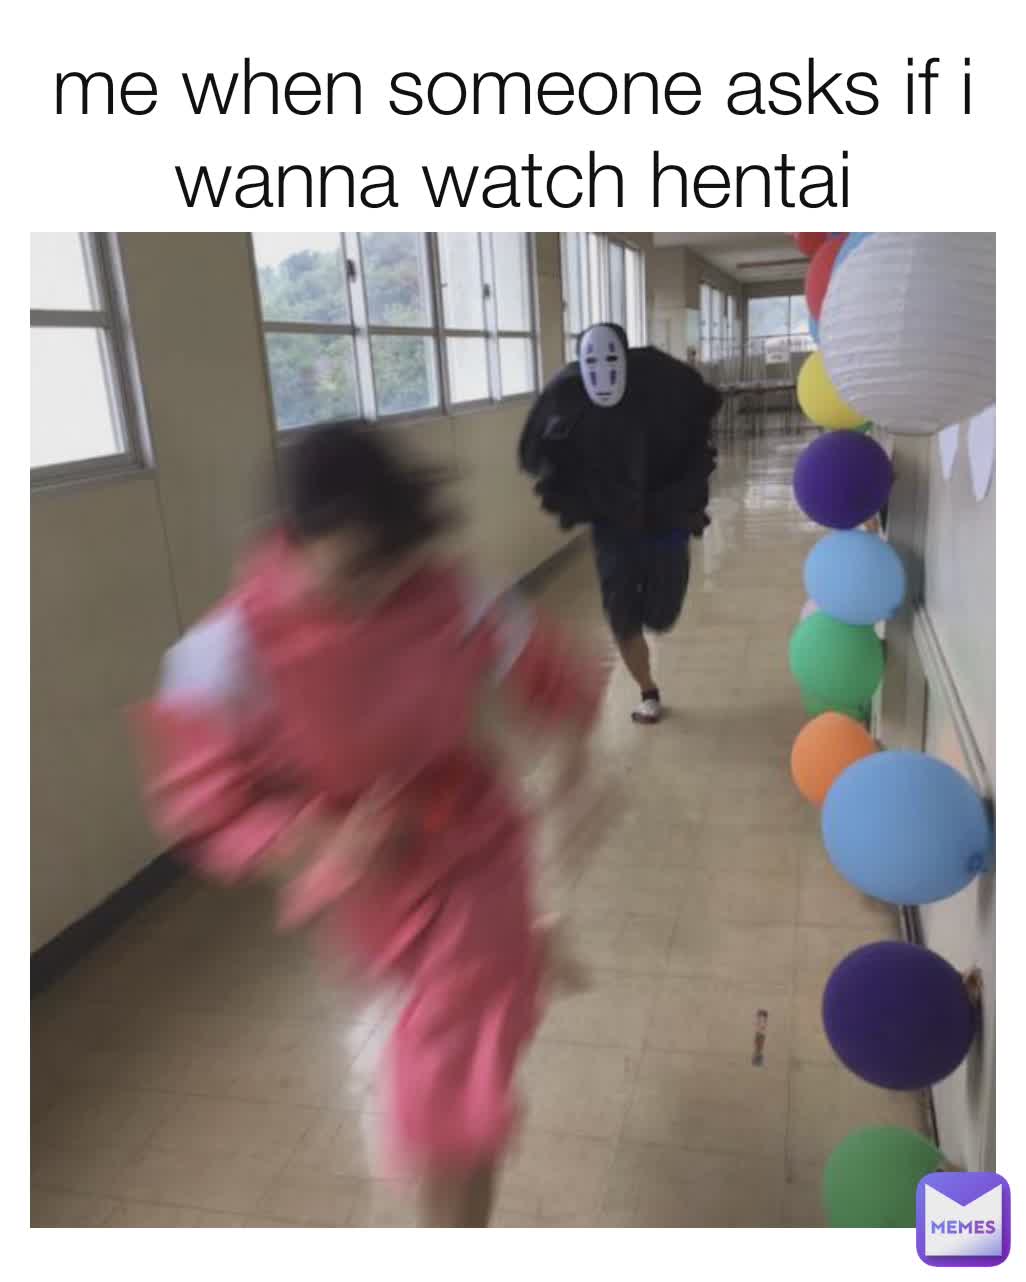 me when someone asks if i wanna watch hentai